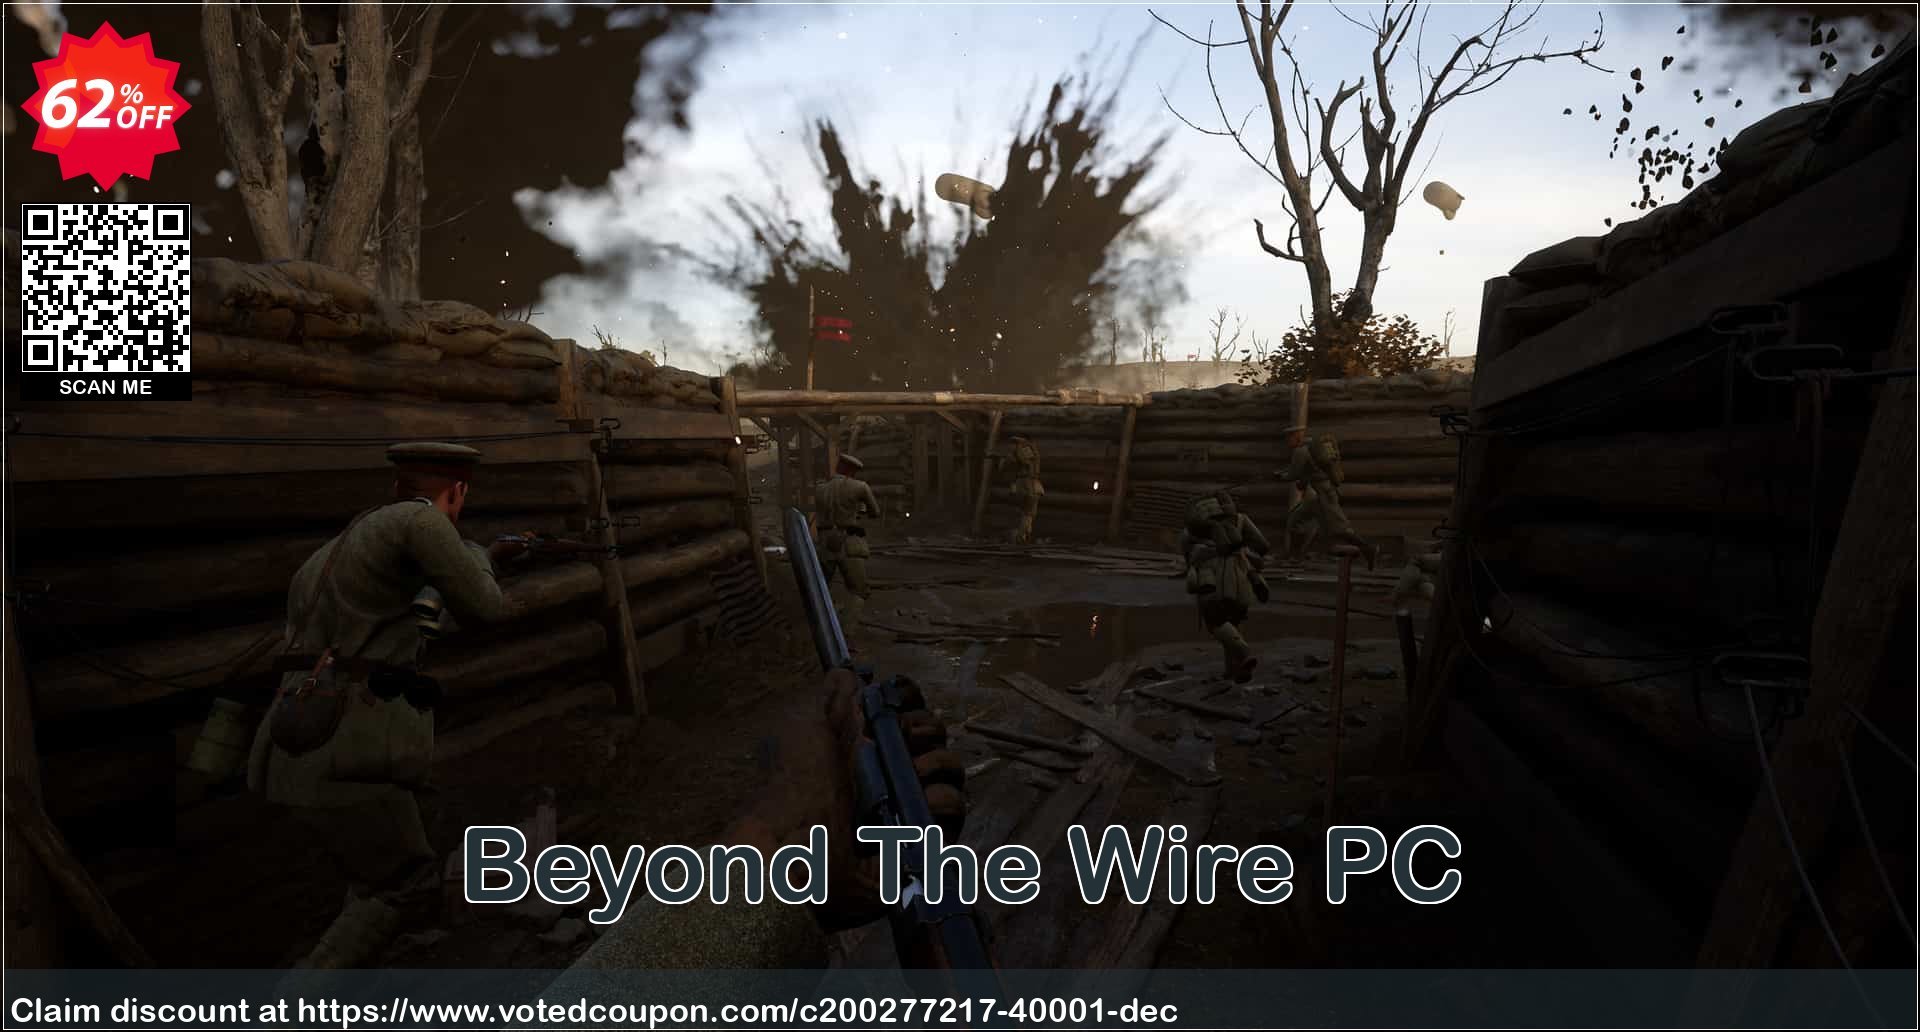 Beyond The Wire PC Coupon Code Sep 2023, 62% OFF - VotedCoupon